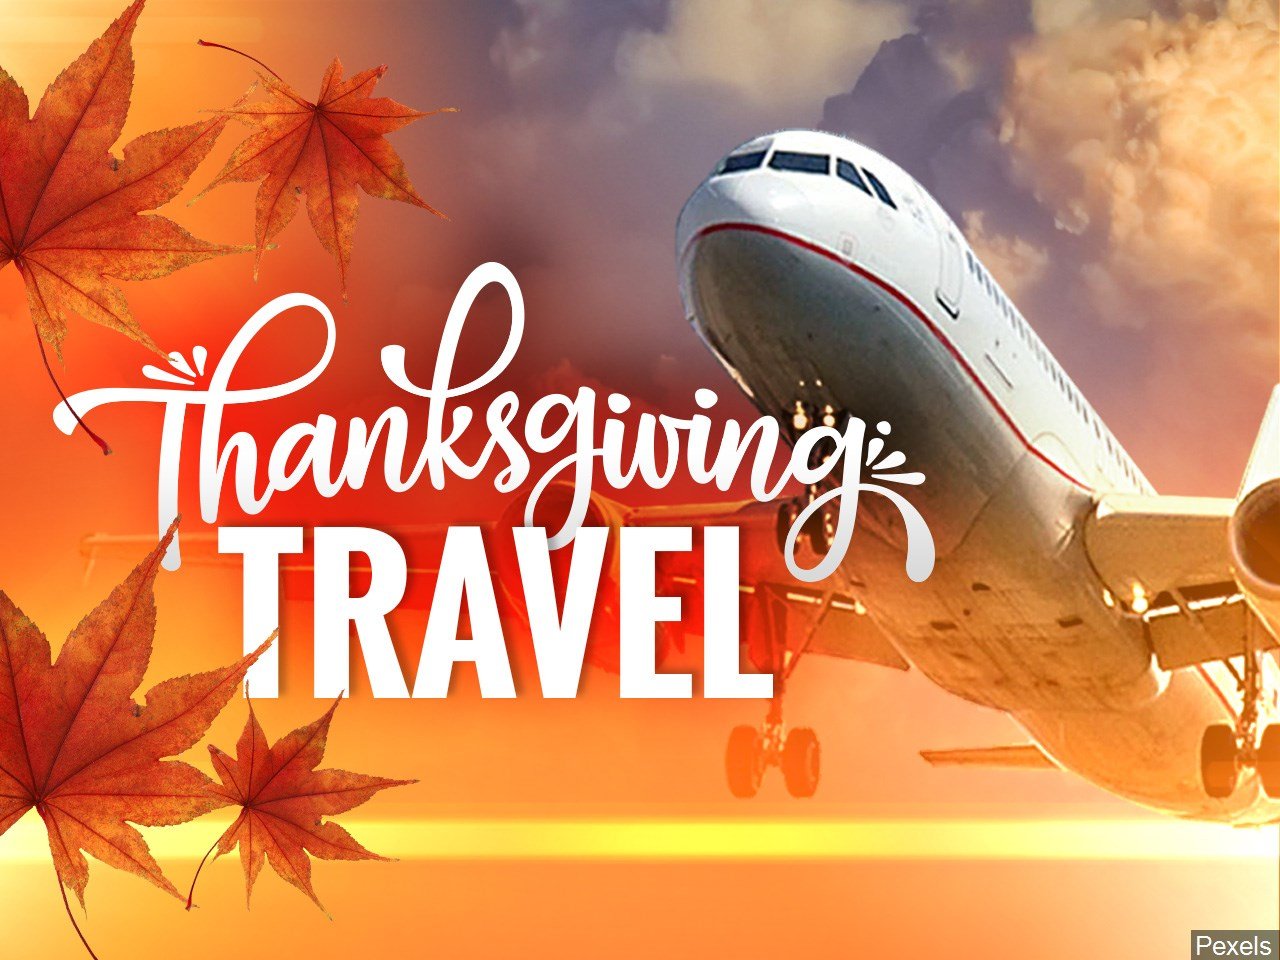 airline travel on thanksgiving day